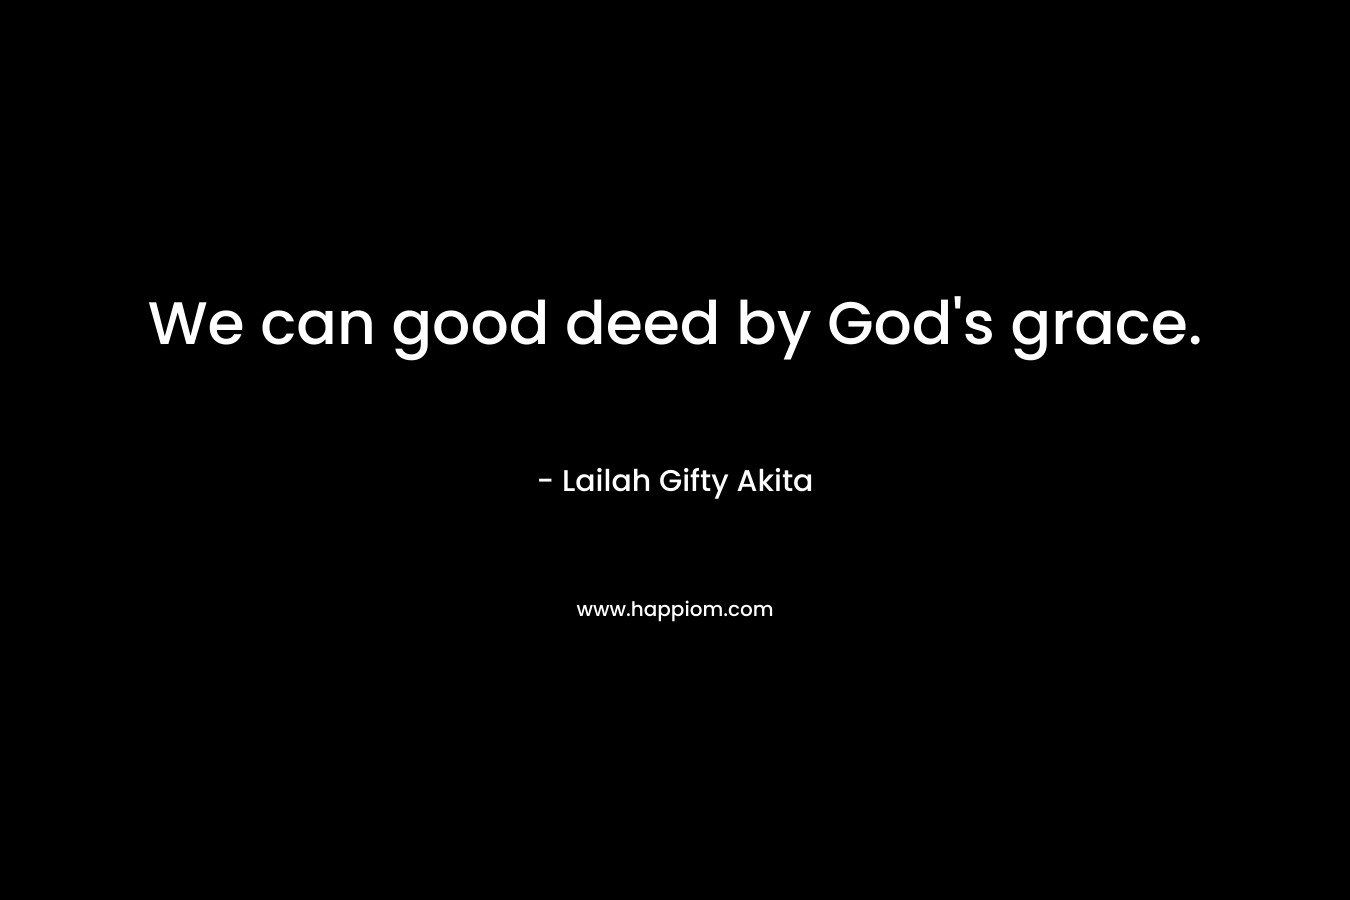 We can good deed by God's grace.